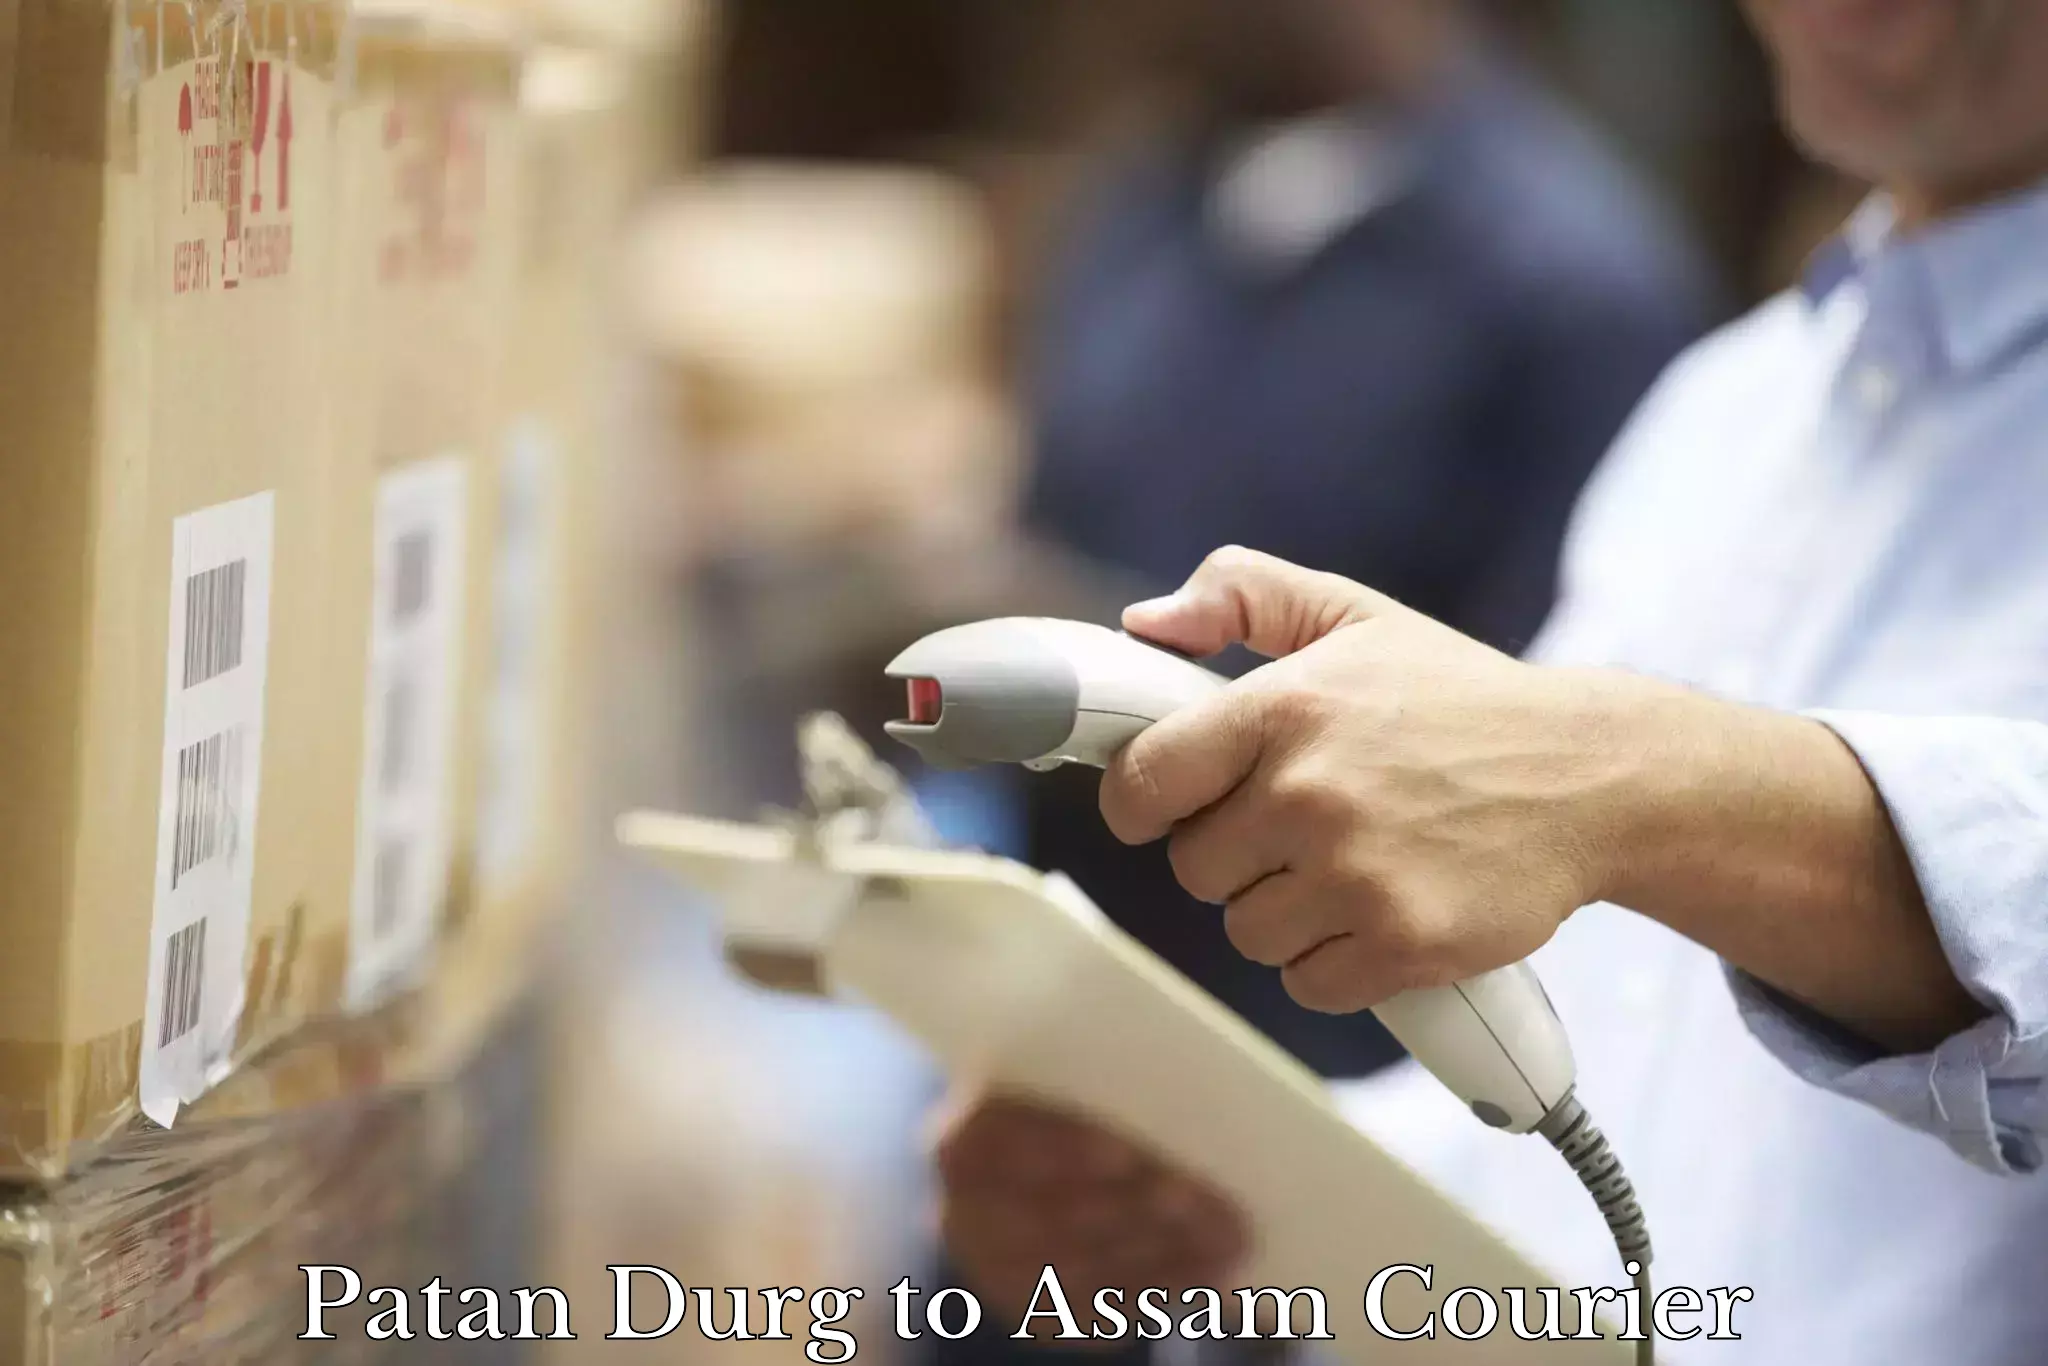 State-of-the-art courier technology Patan Durg to Digboi